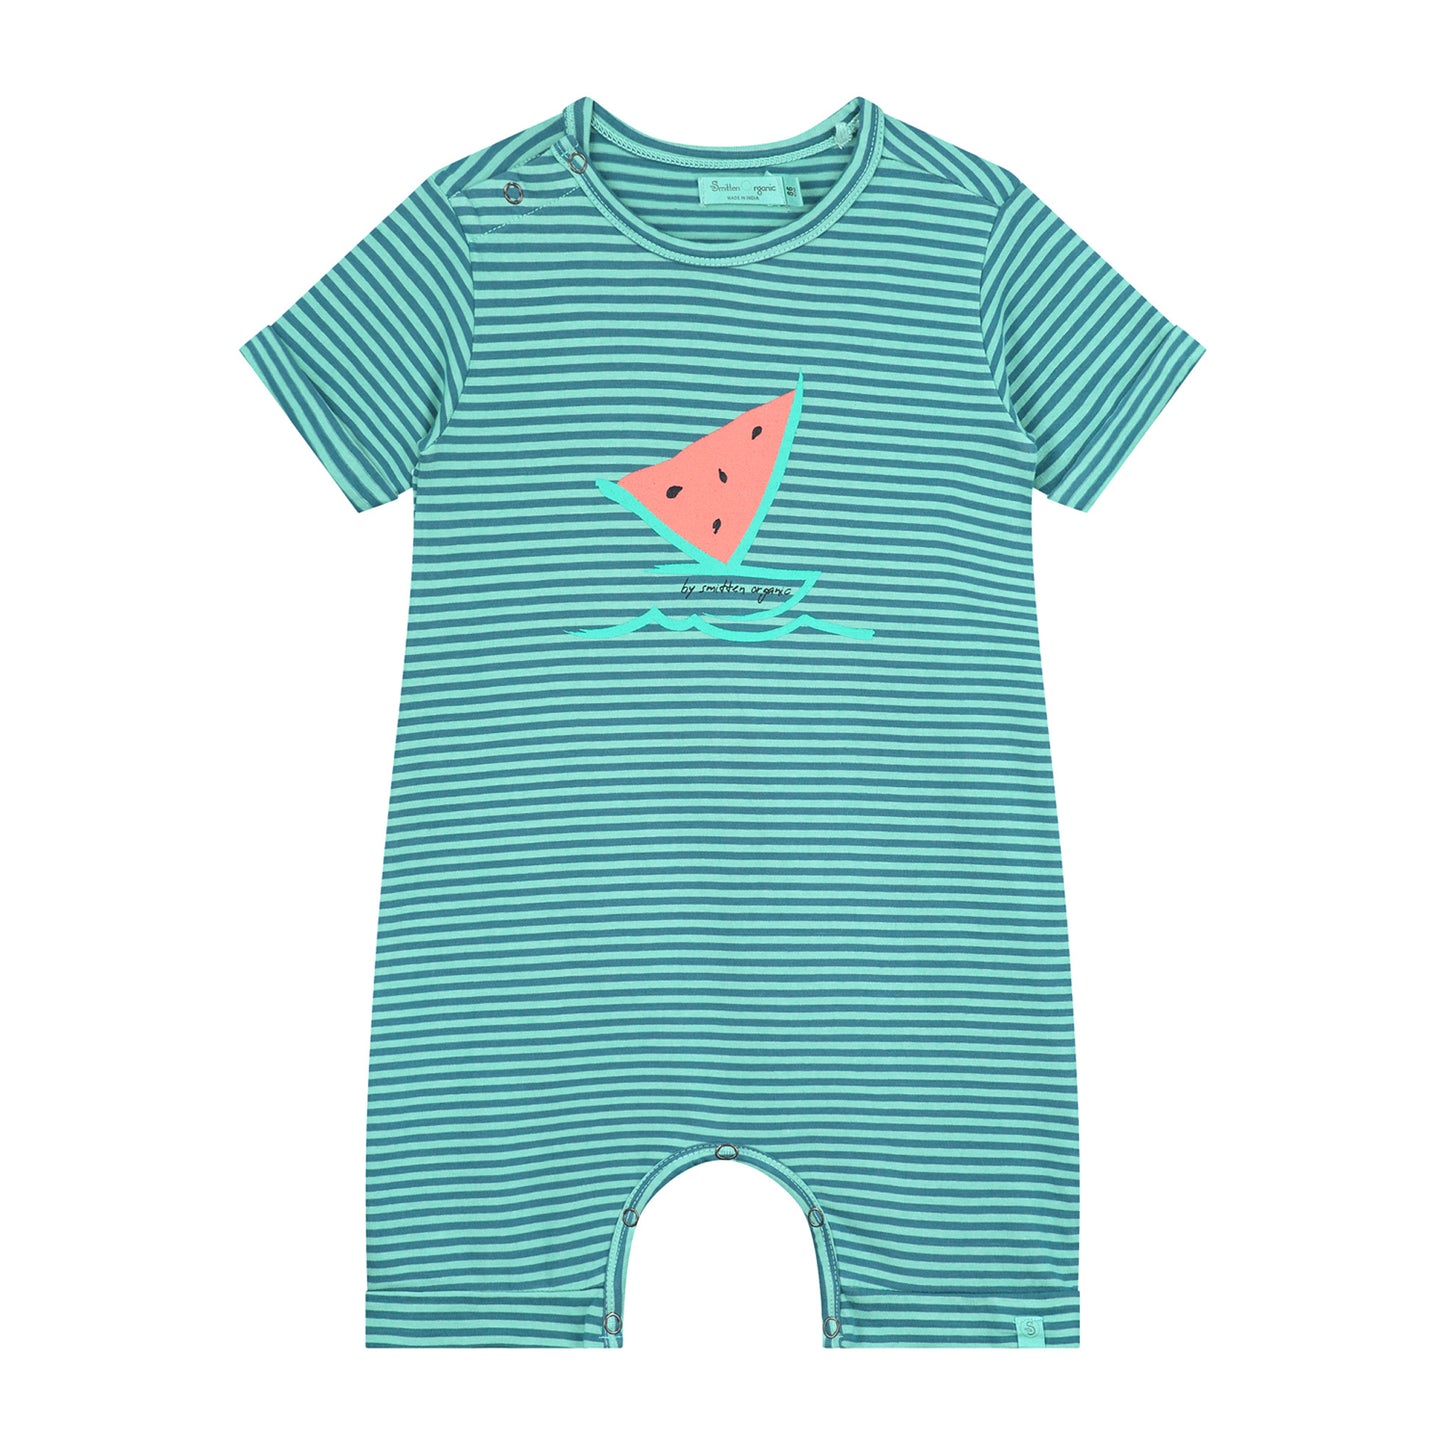 Watermelon Boat Striped Playsuit